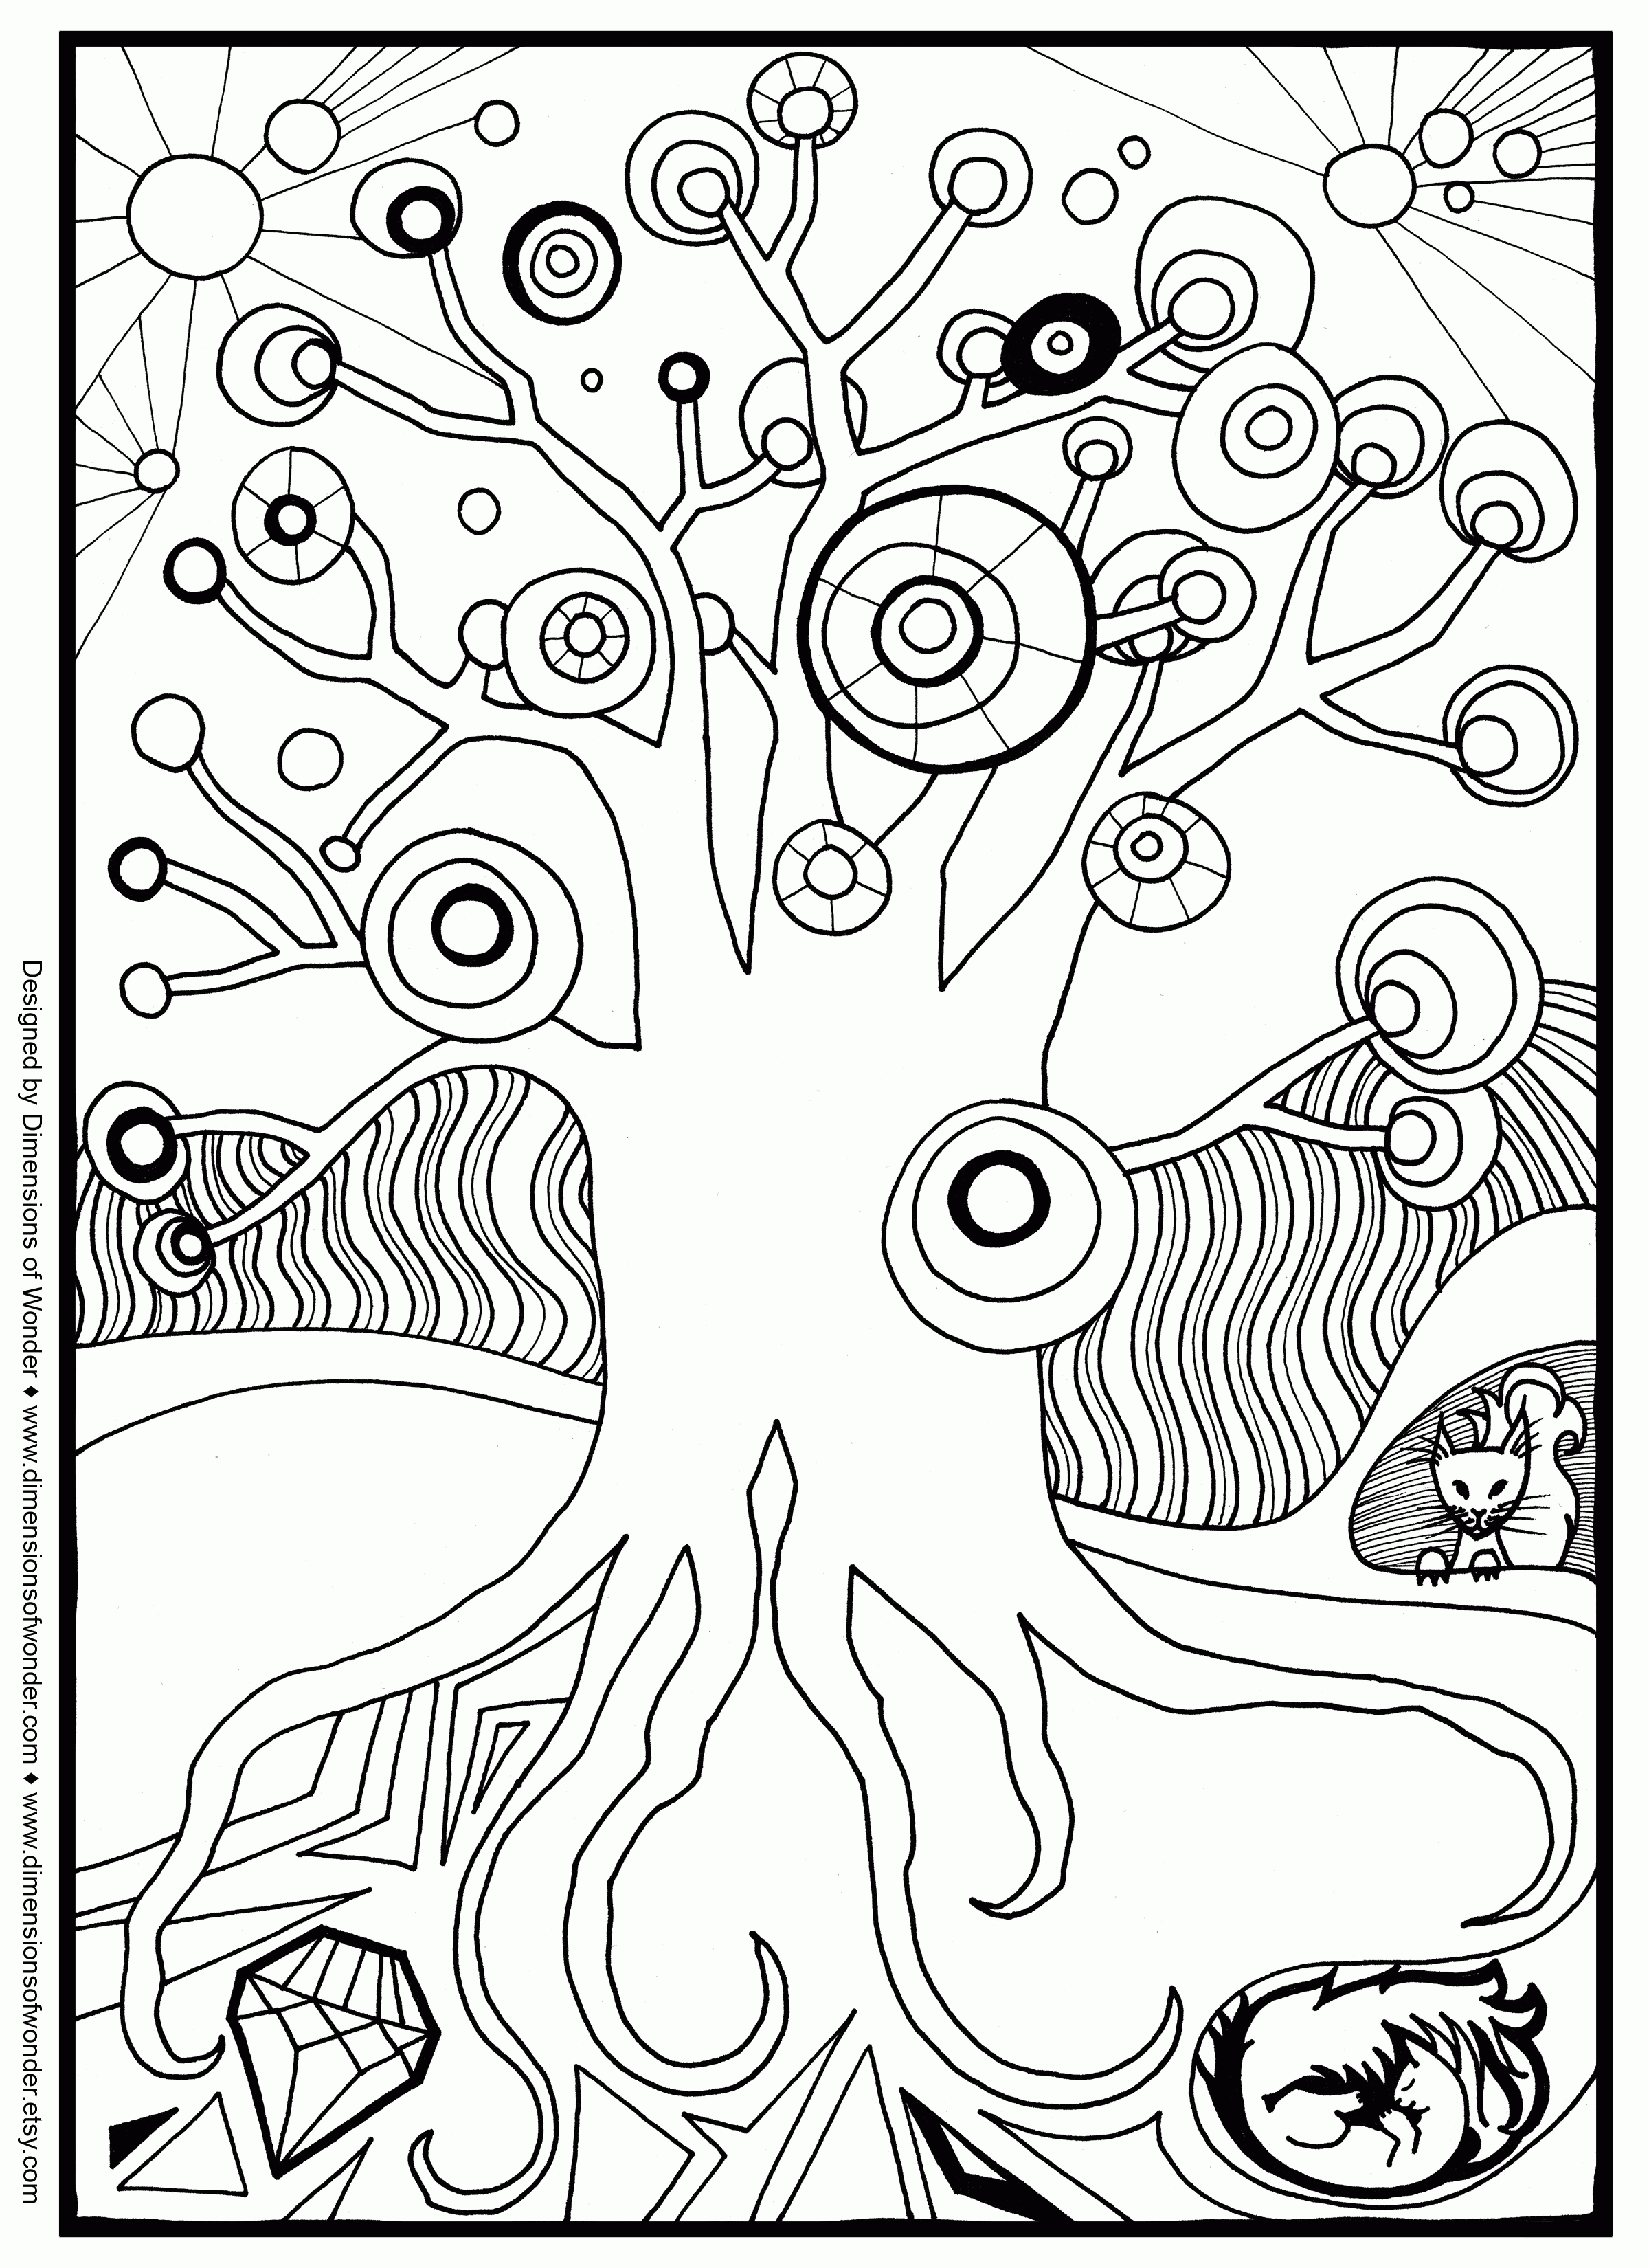 Winter Coloring Pages For Adults   Coloring Home